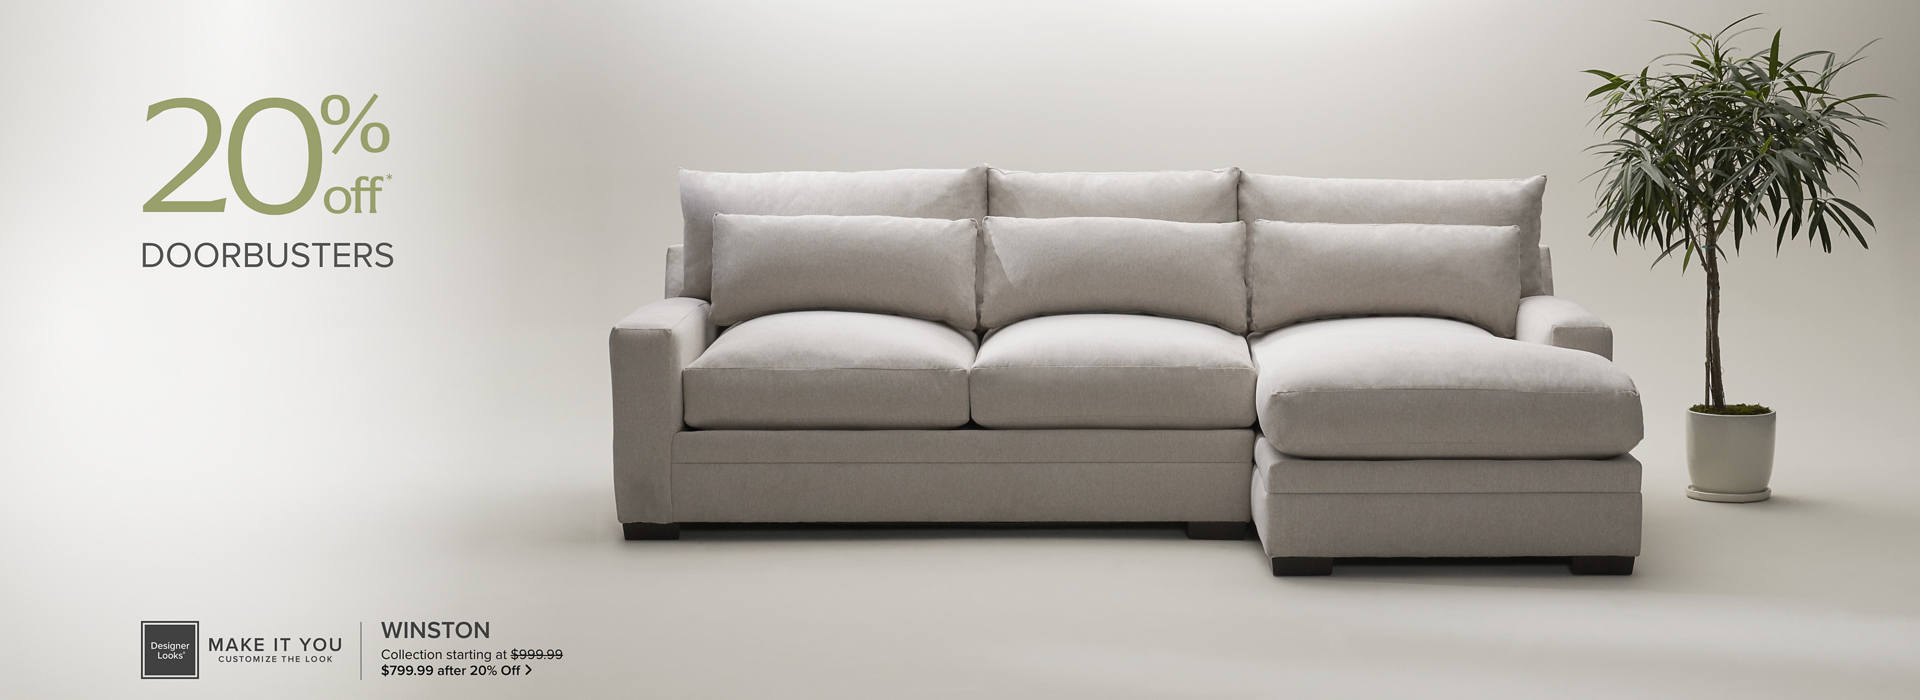 Cordelle 2-Piece Sofa starting at $799.99 after 20% off